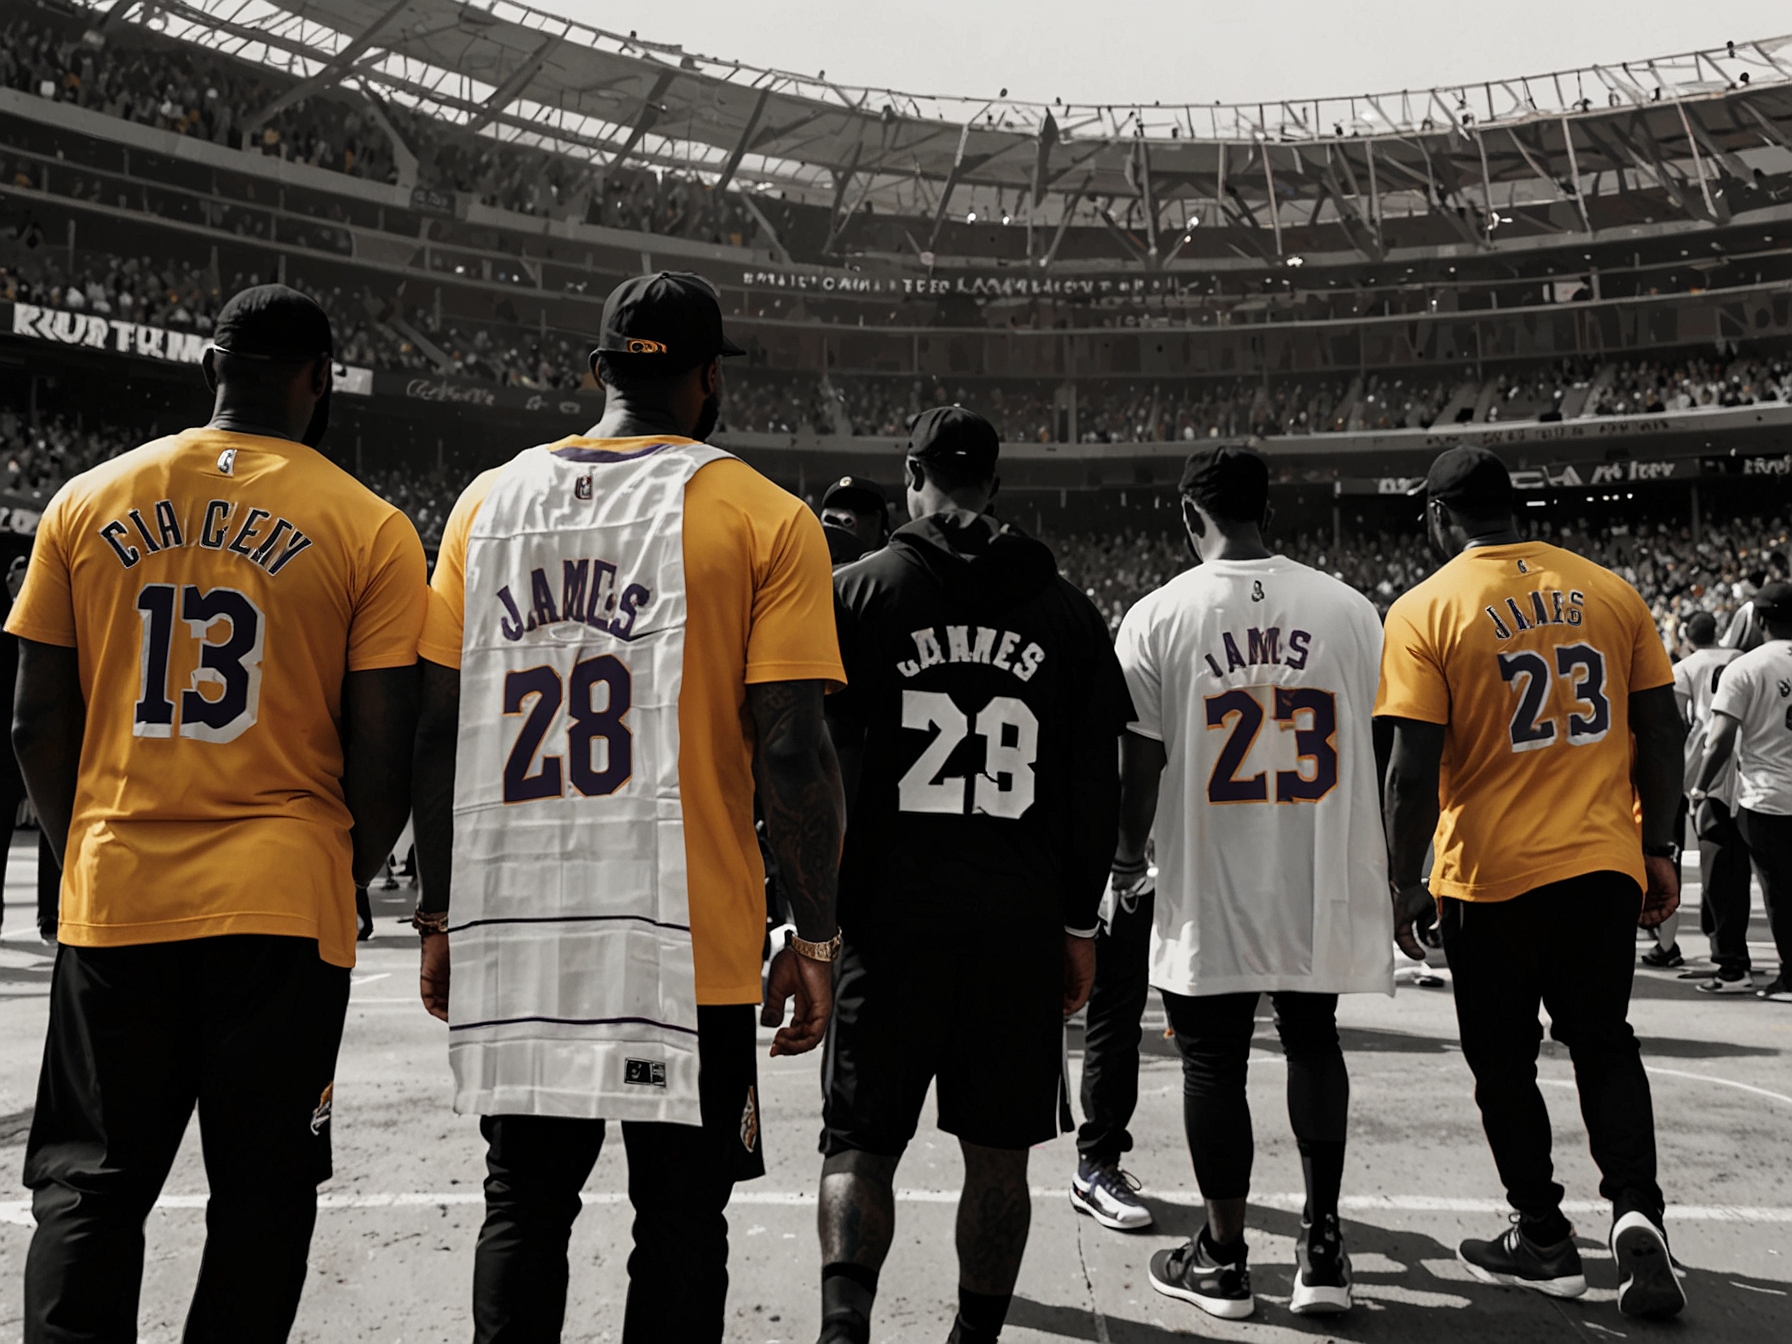 A group of fans gathered outside the Lakers’ stadium holding banners and merchandise dedicated to LeBron James, representing the emotional bond between the player and the fanbase.